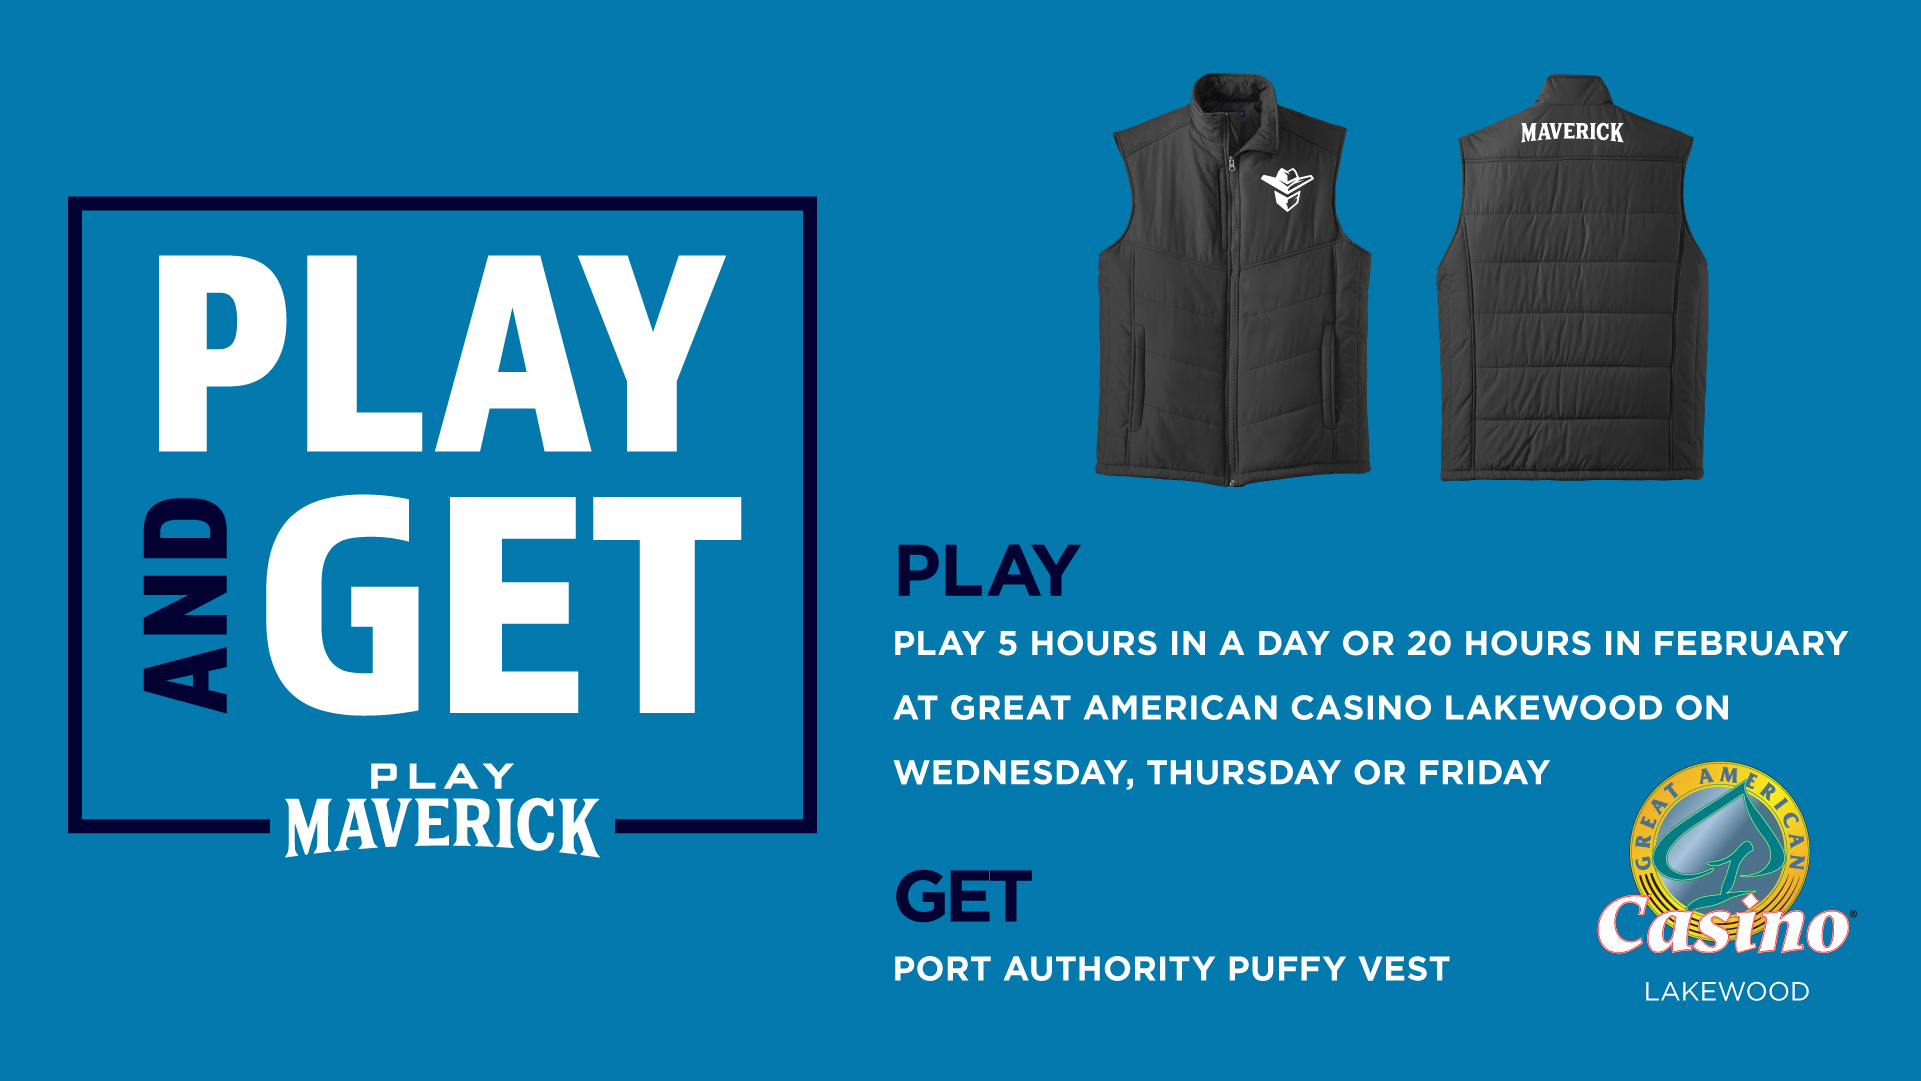 Play and Get | Great American Casino Lakewood Play 5 hours in a day or 20 hours in February at Great American Casino Lakewood on Wednesday, Thursday or Friday Get Port Authority Puffy Vest